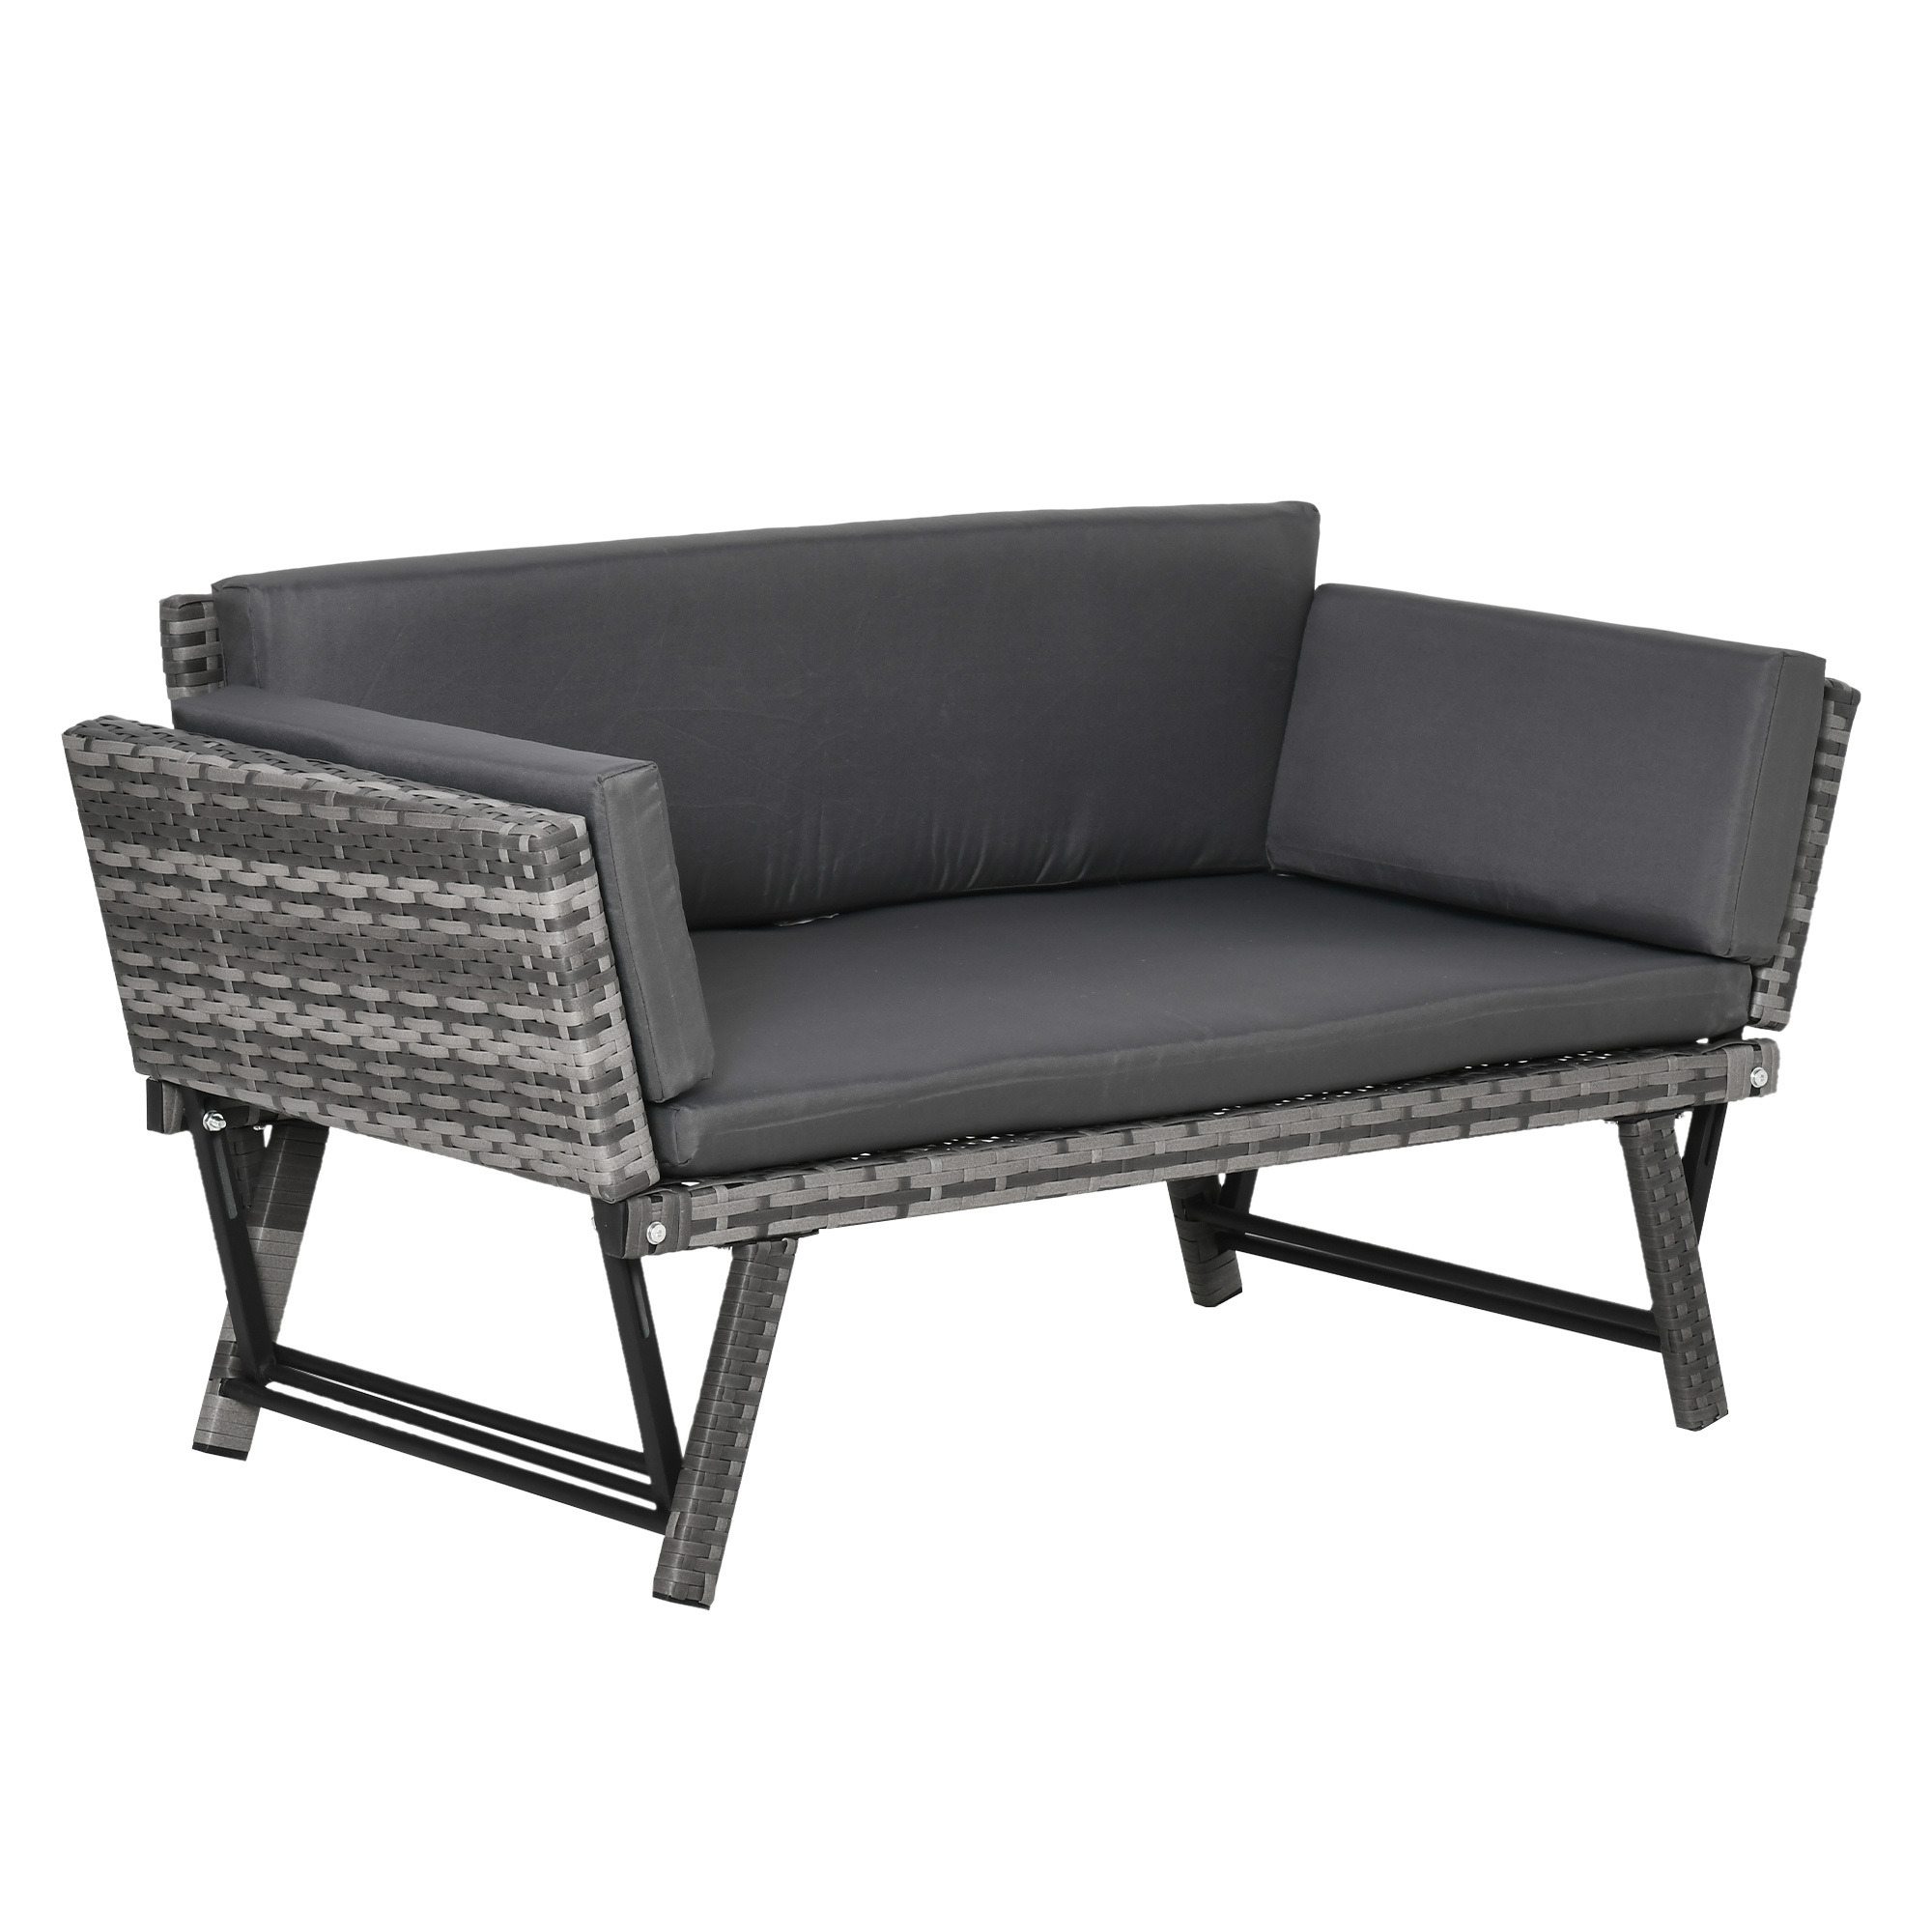 Outsunny 2 Seater Rattan Folding Daybed Sofa Bench Garden Chaise Lounger Loveseat with Cushion Outdoor Patio Grey